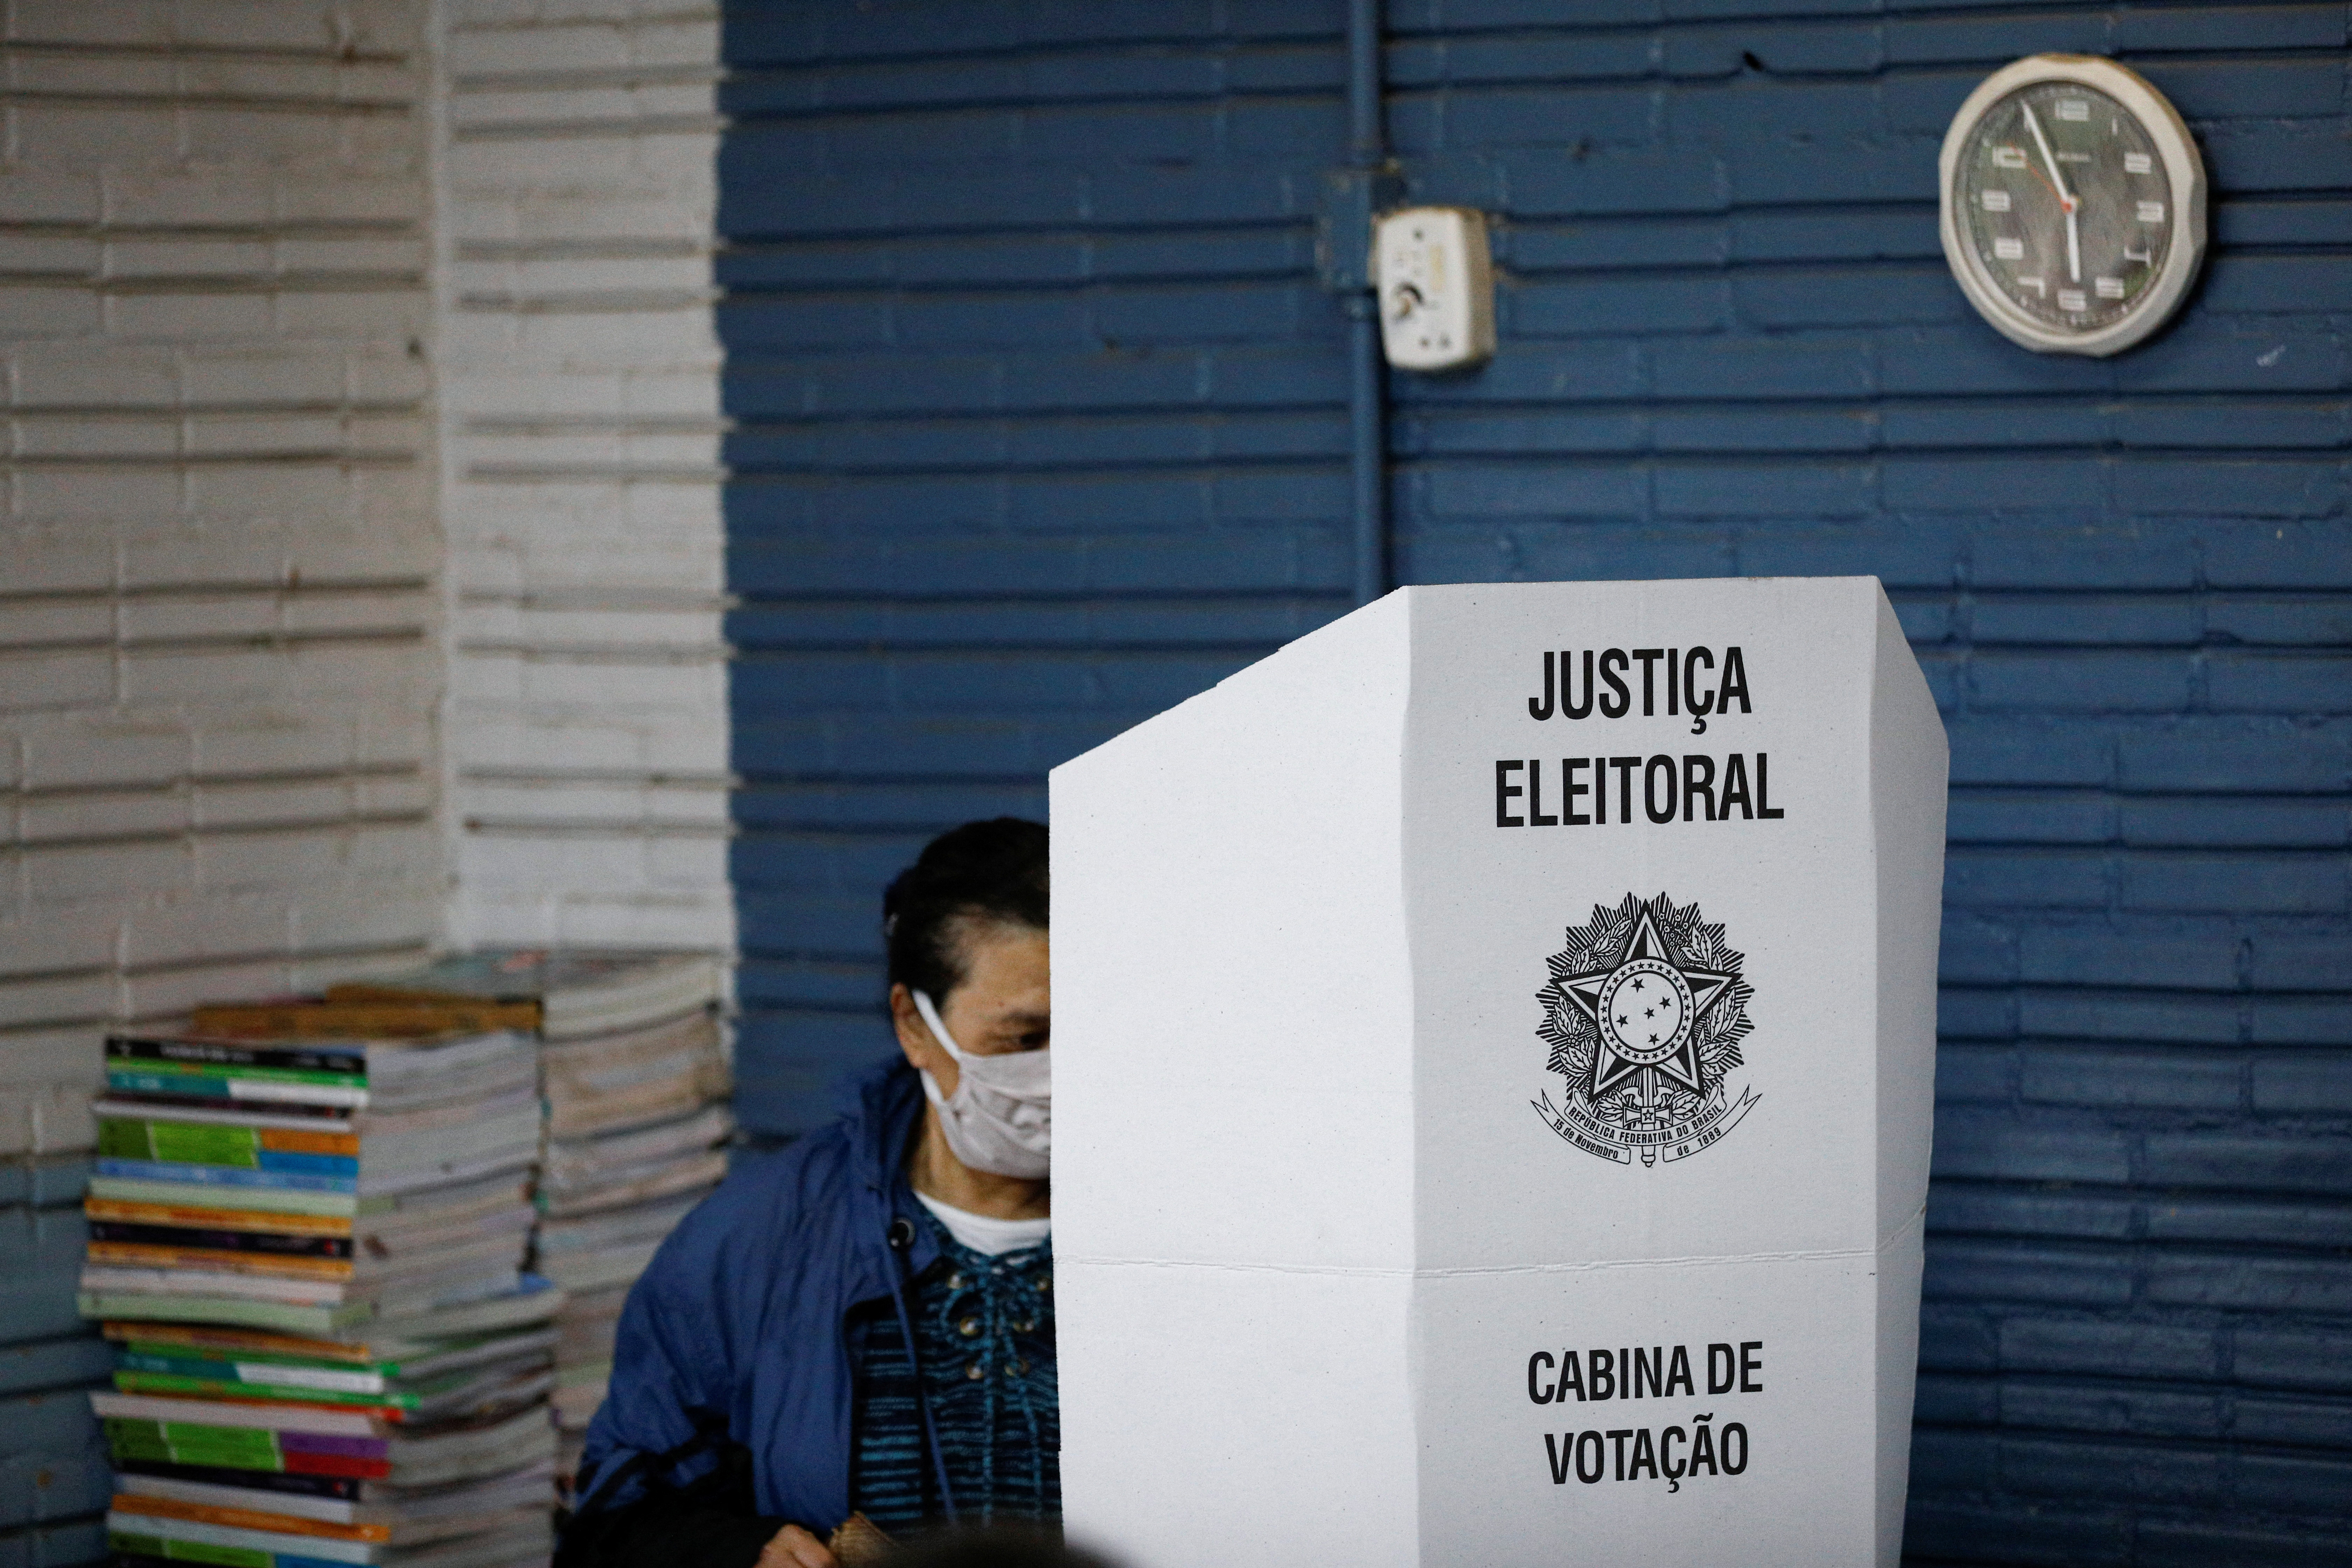 More than 156 million voters were eligible to vote (REUTERS / Diego Vara)